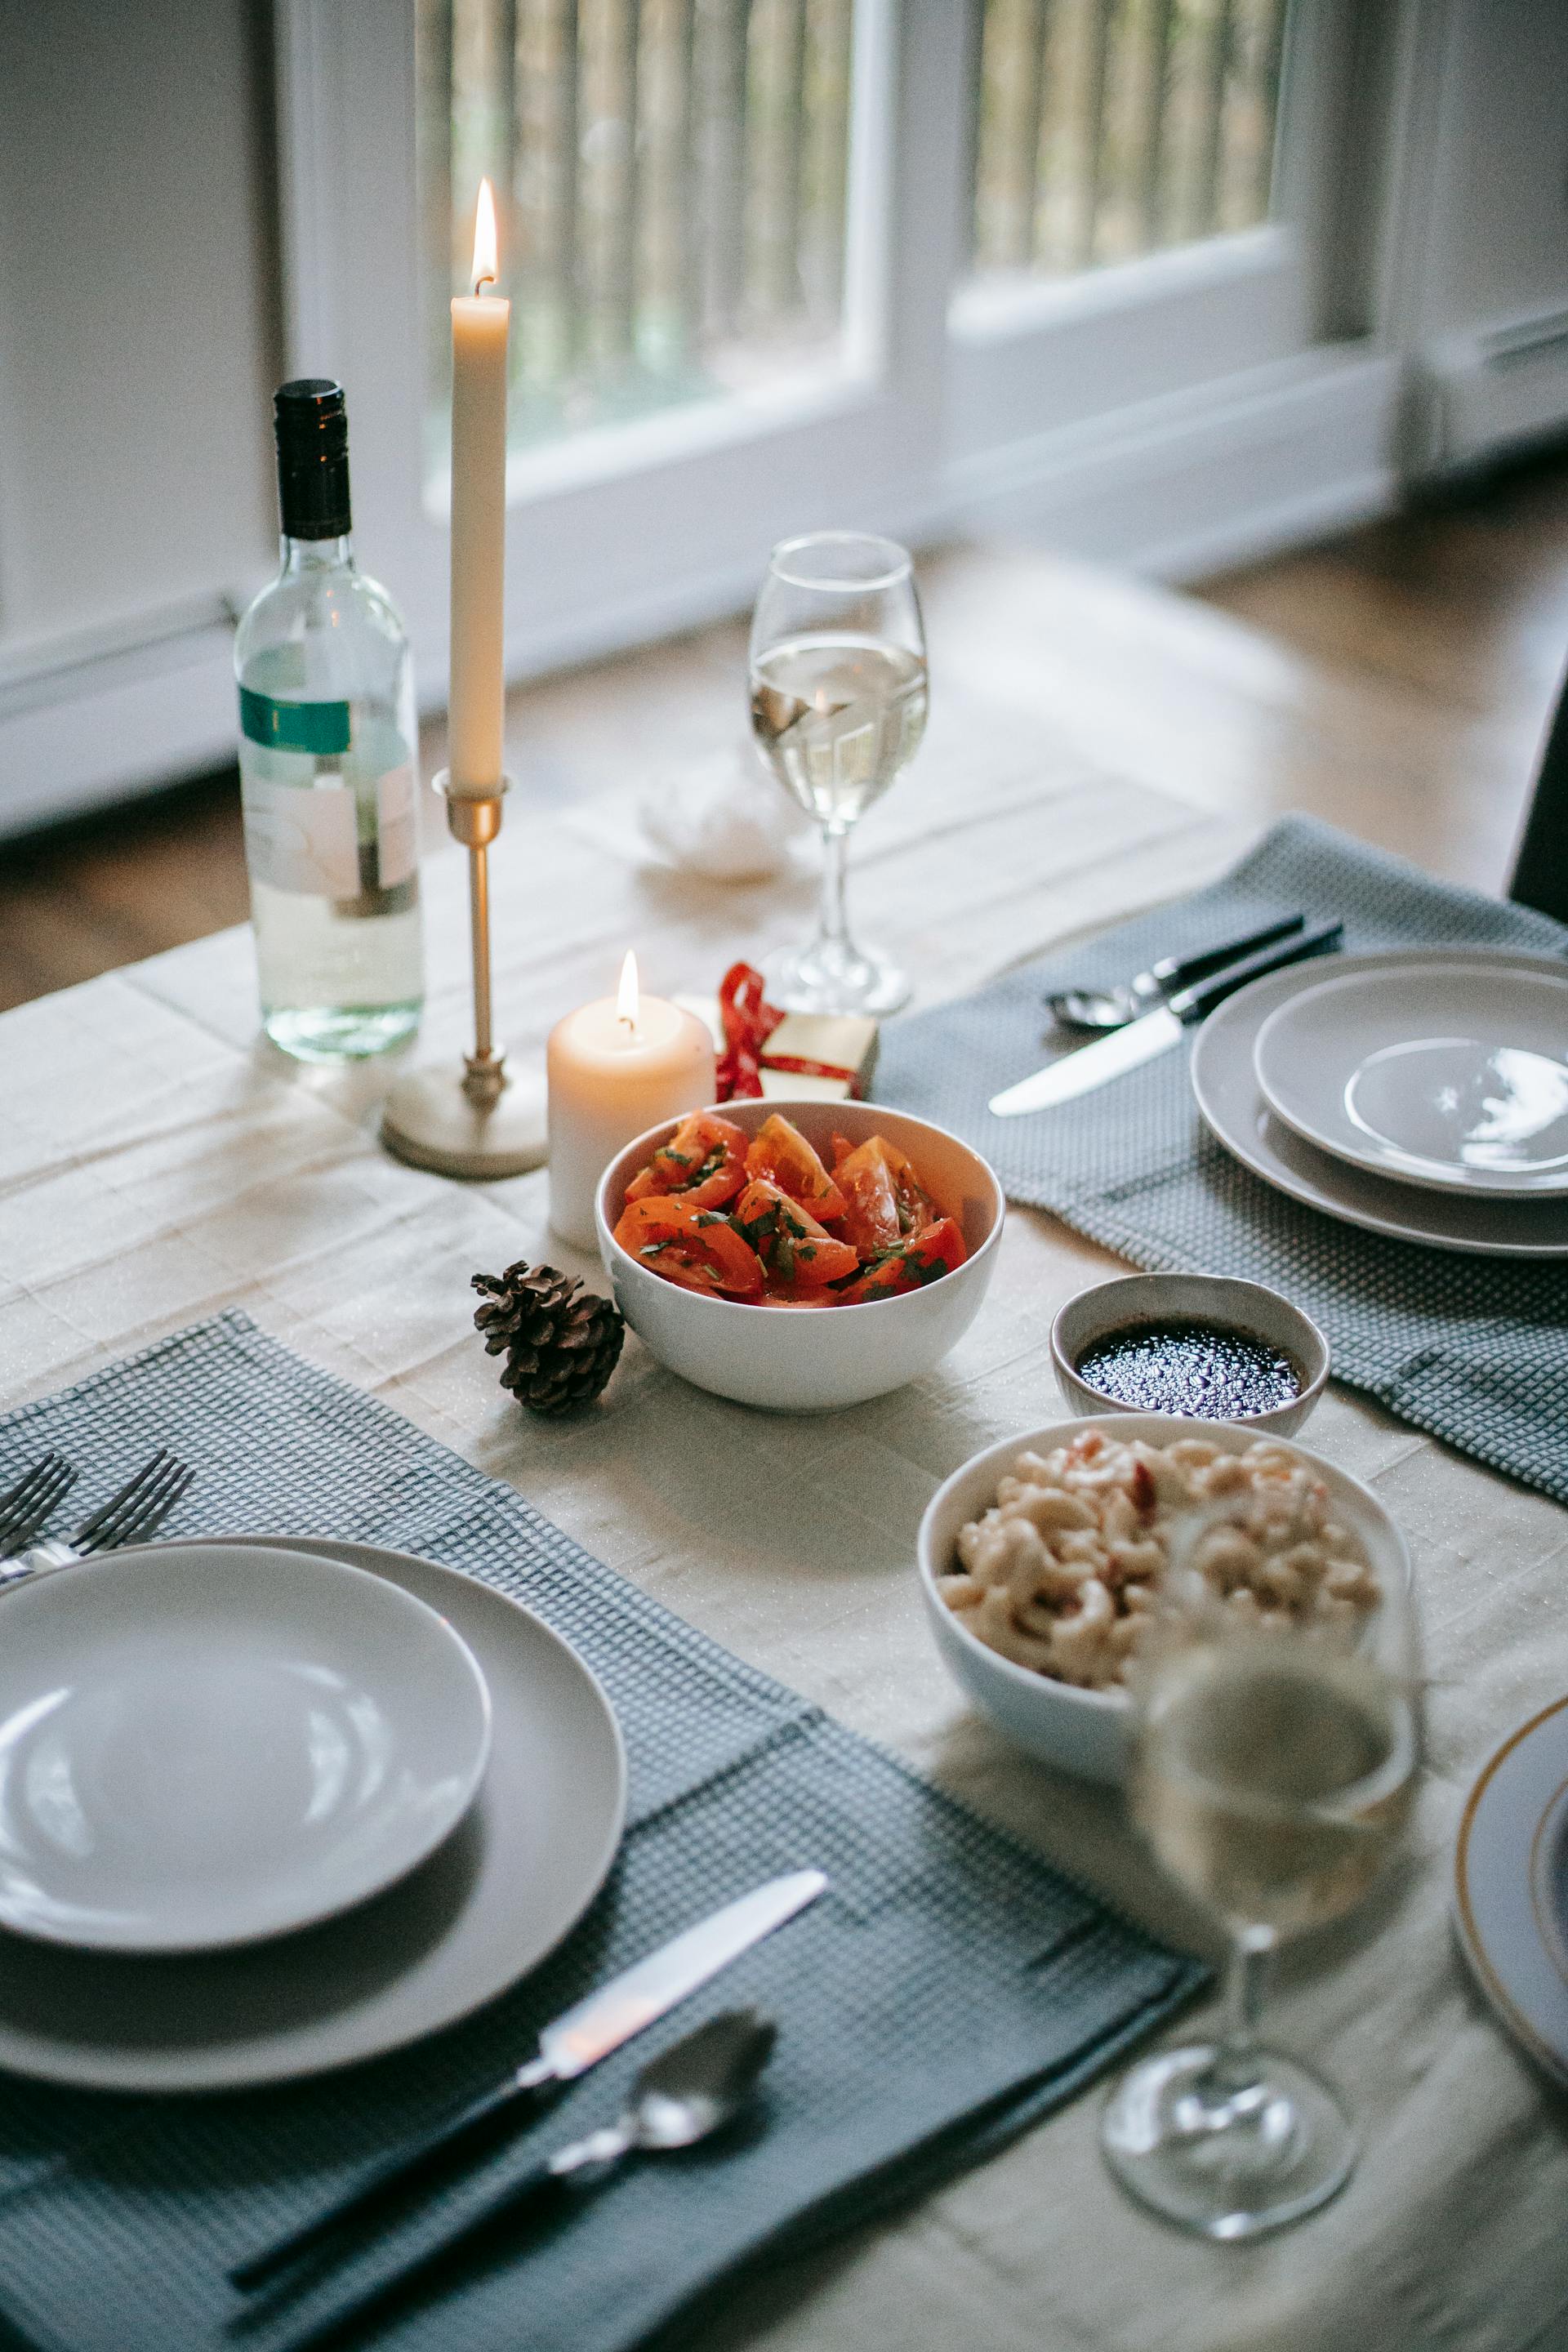 A table setting | Source: Pexels